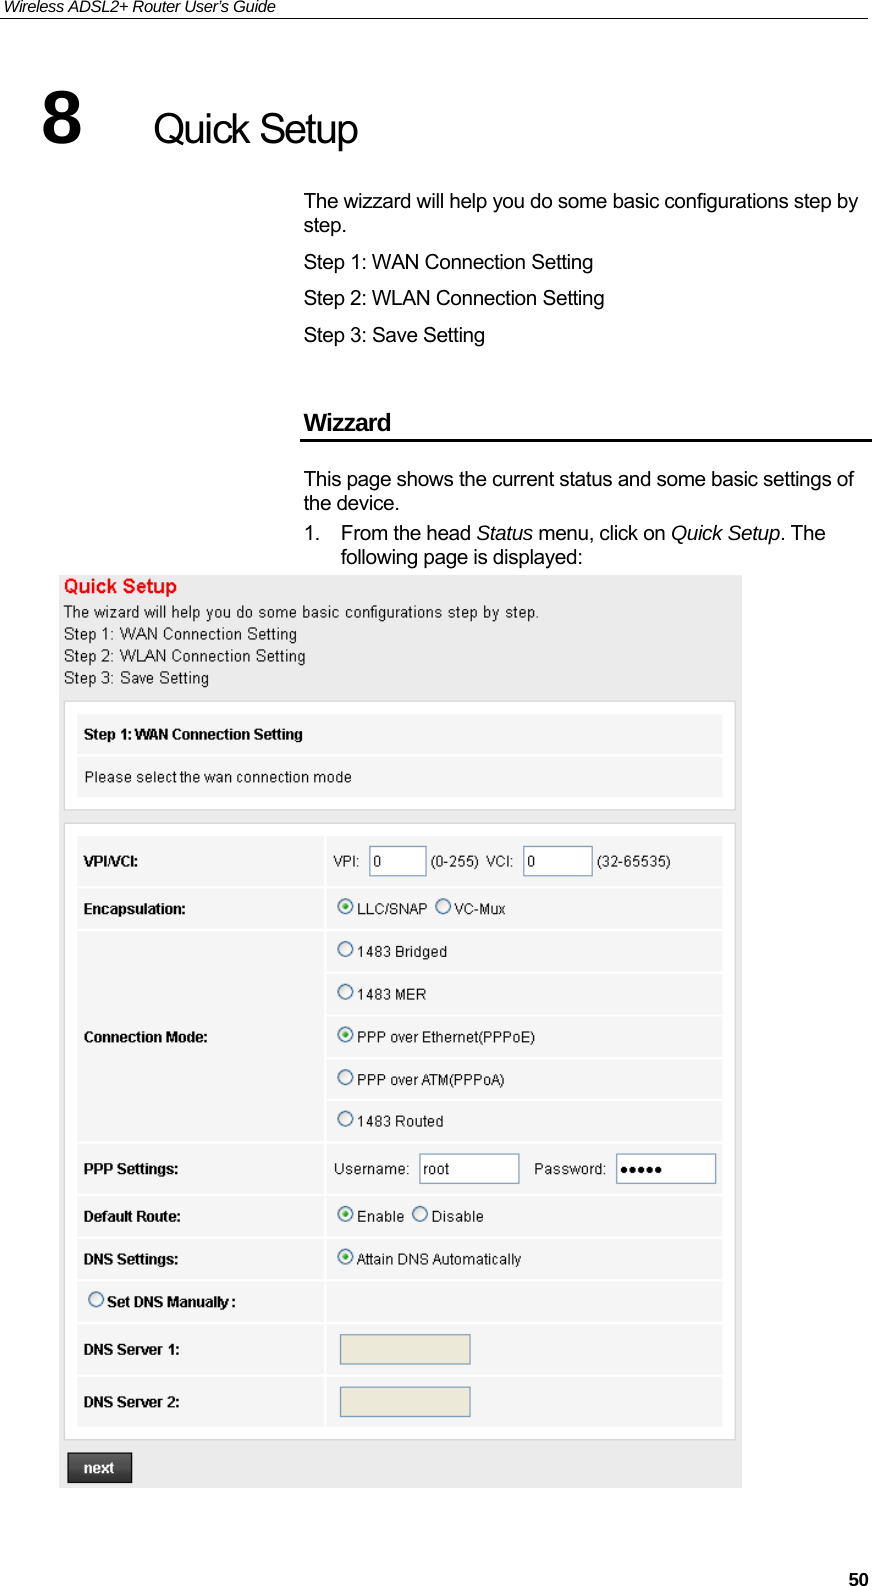 Wireless ADSL2+ Router User’s Guide     508  Quick Setup The wizzard will help you do some basic configurations step by step. Step 1: WAN Connection Setting Step 2: WLAN Connection Setting Step 3: Save Setting  Wizzard This page shows the current status and some basic settings of the device. 1. From the head Status menu, click on Quick Setup. The following page is displayed:   